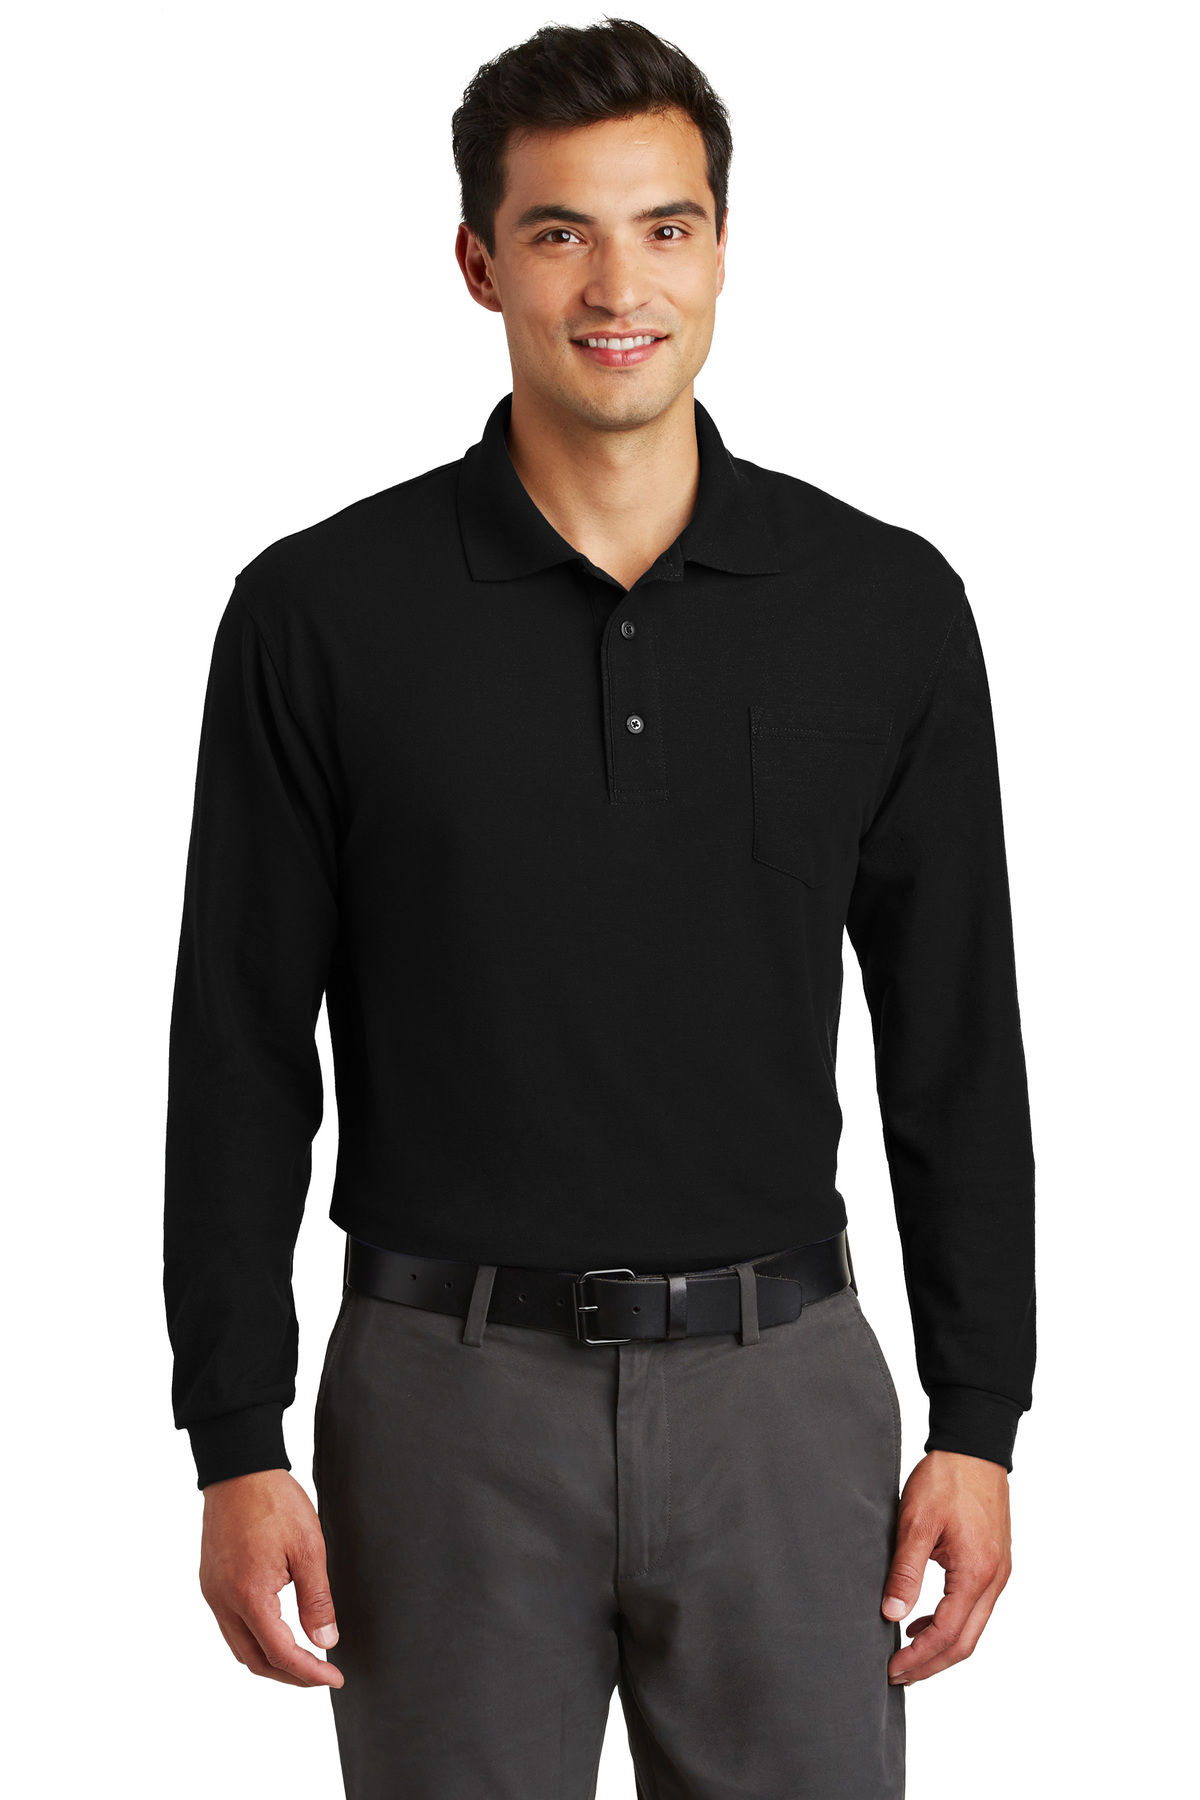 K500LS Mens Port Authority Long Sleeve Silk Touch Polo 